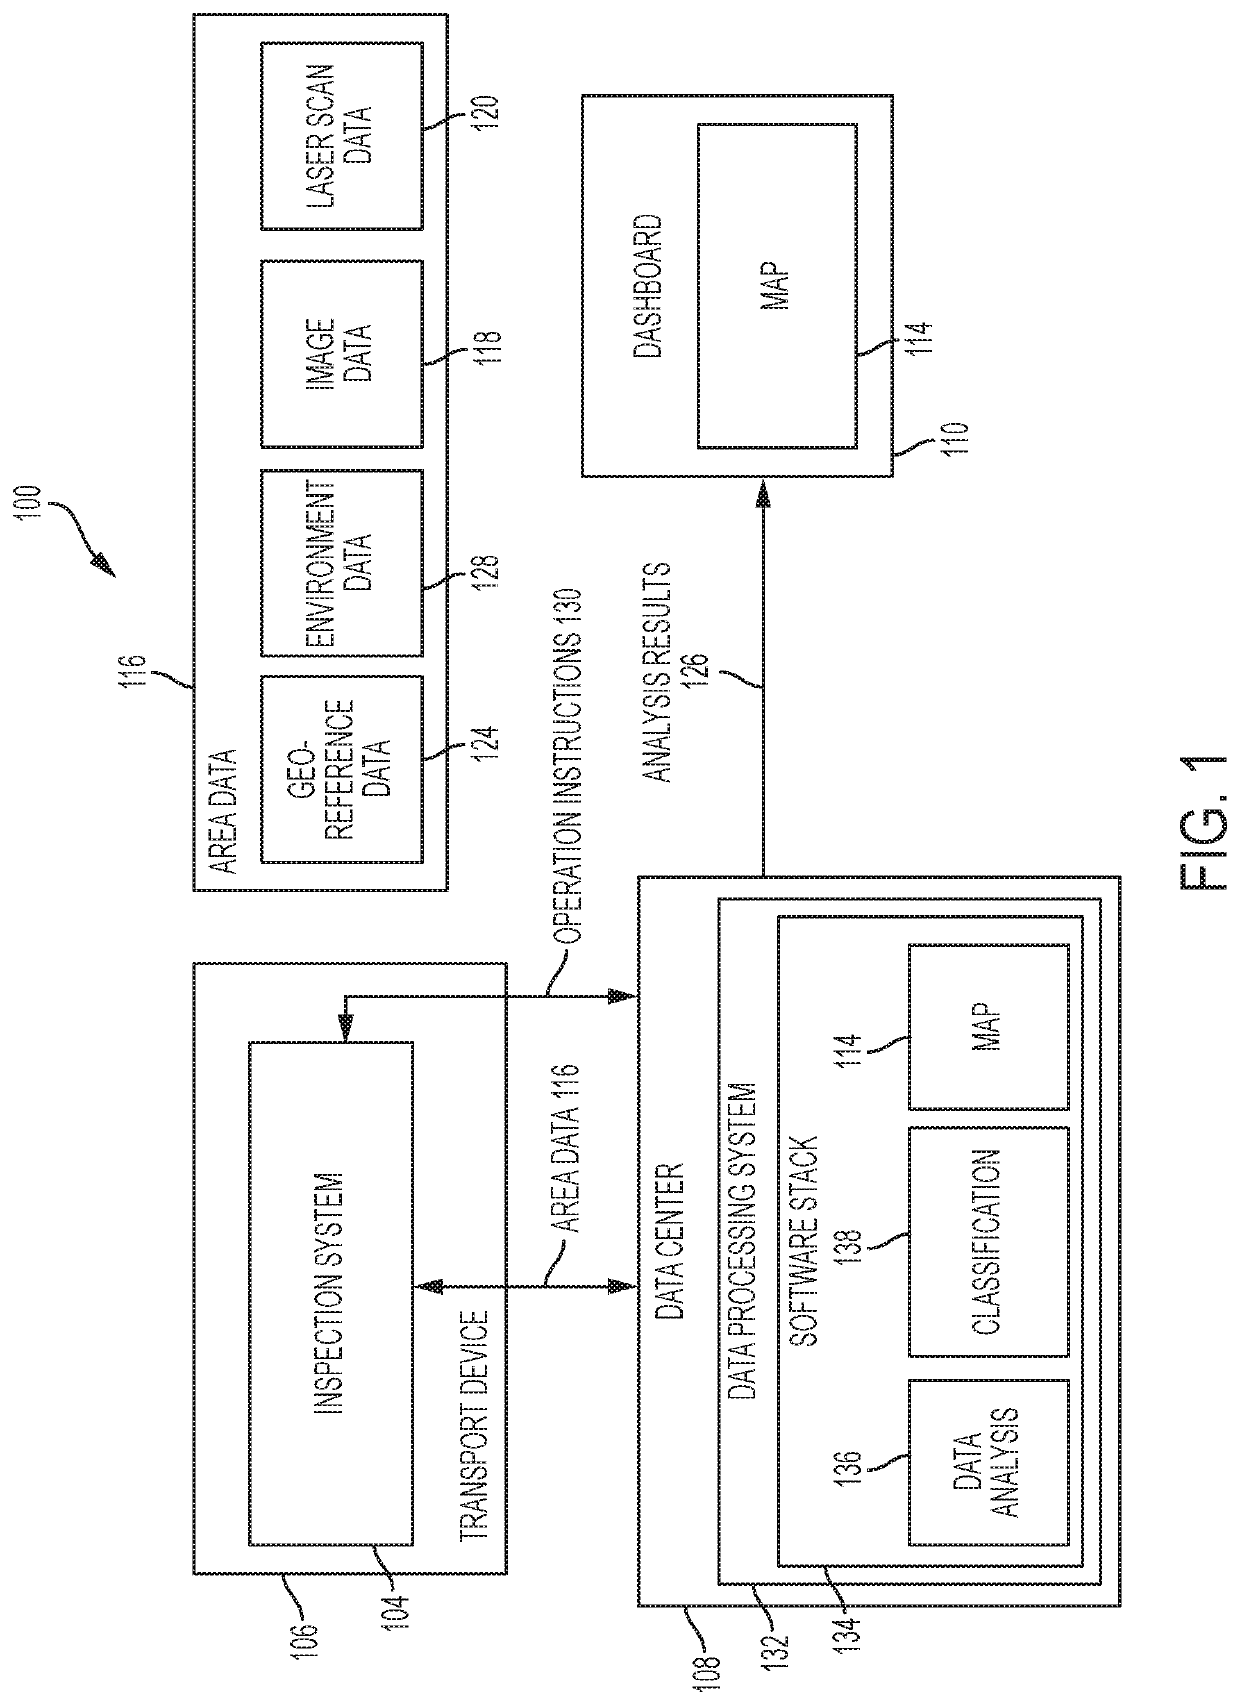 Systems, devices, and methods for in-field diagnosis of growth stage and crop yield estimation in a plant area